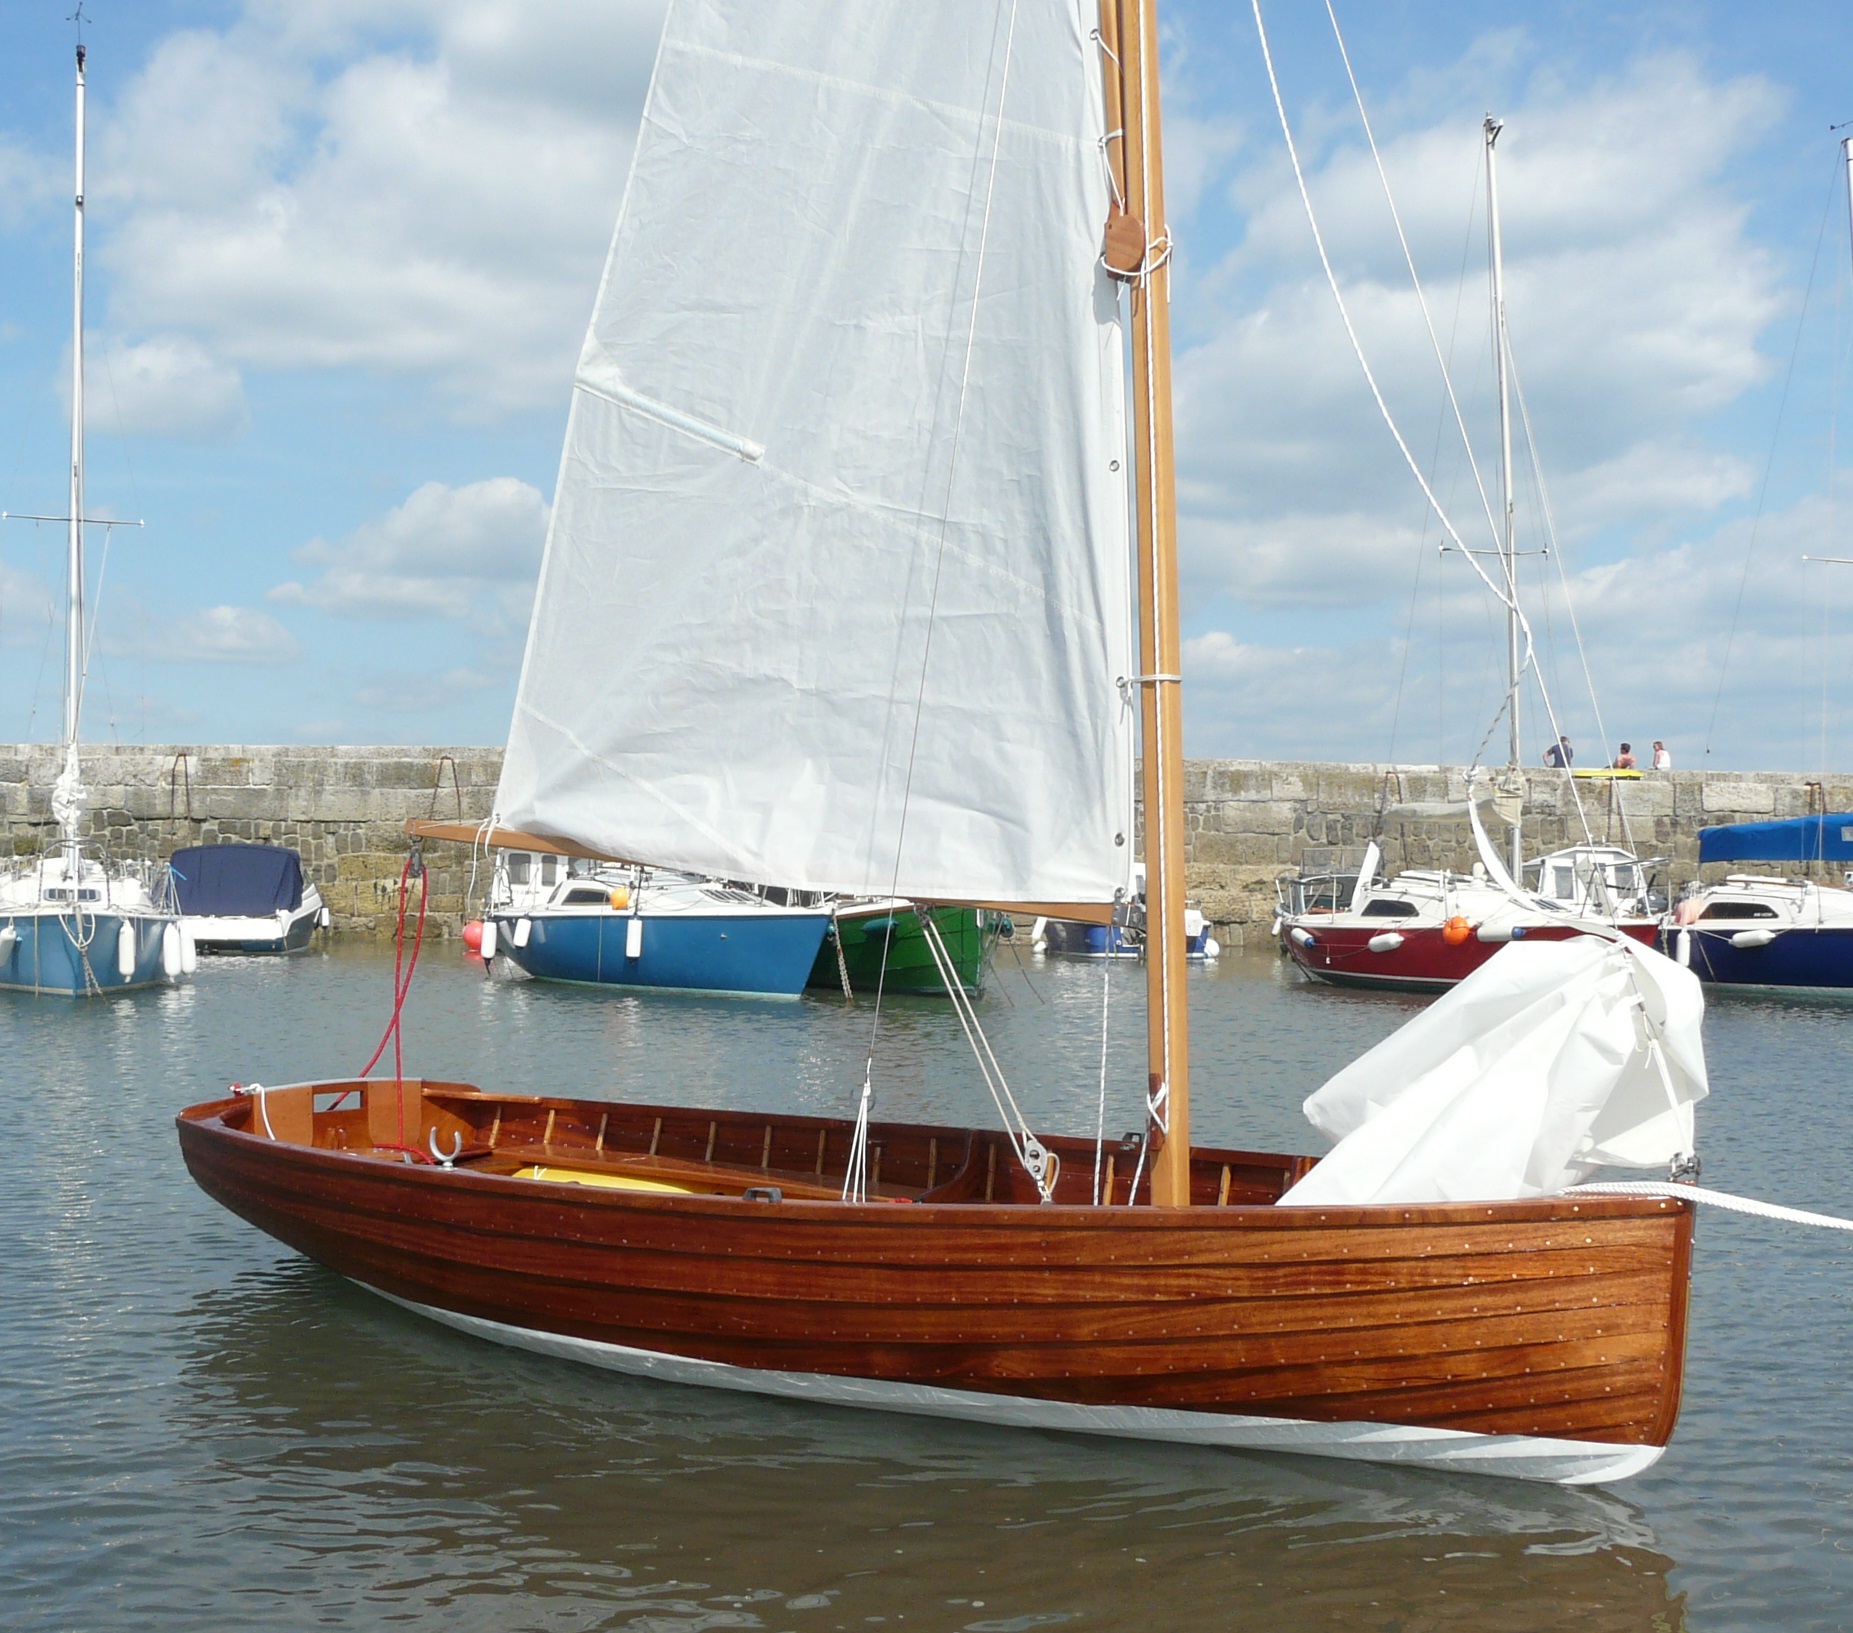 dinghy sailboat for sale